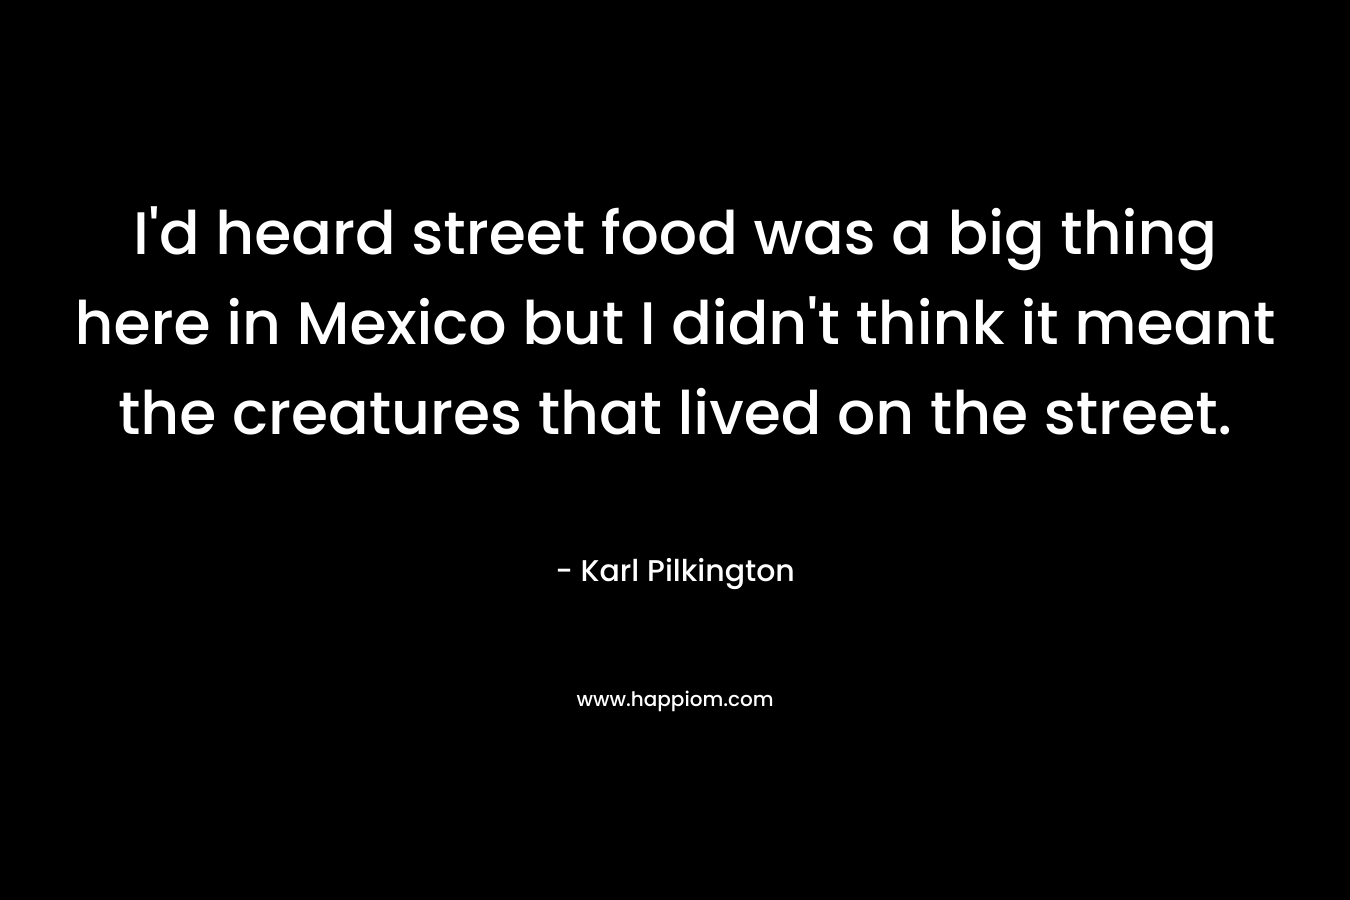 I'd heard street food was a big thing here in Mexico but I didn't think it meant the creatures that lived on the street.